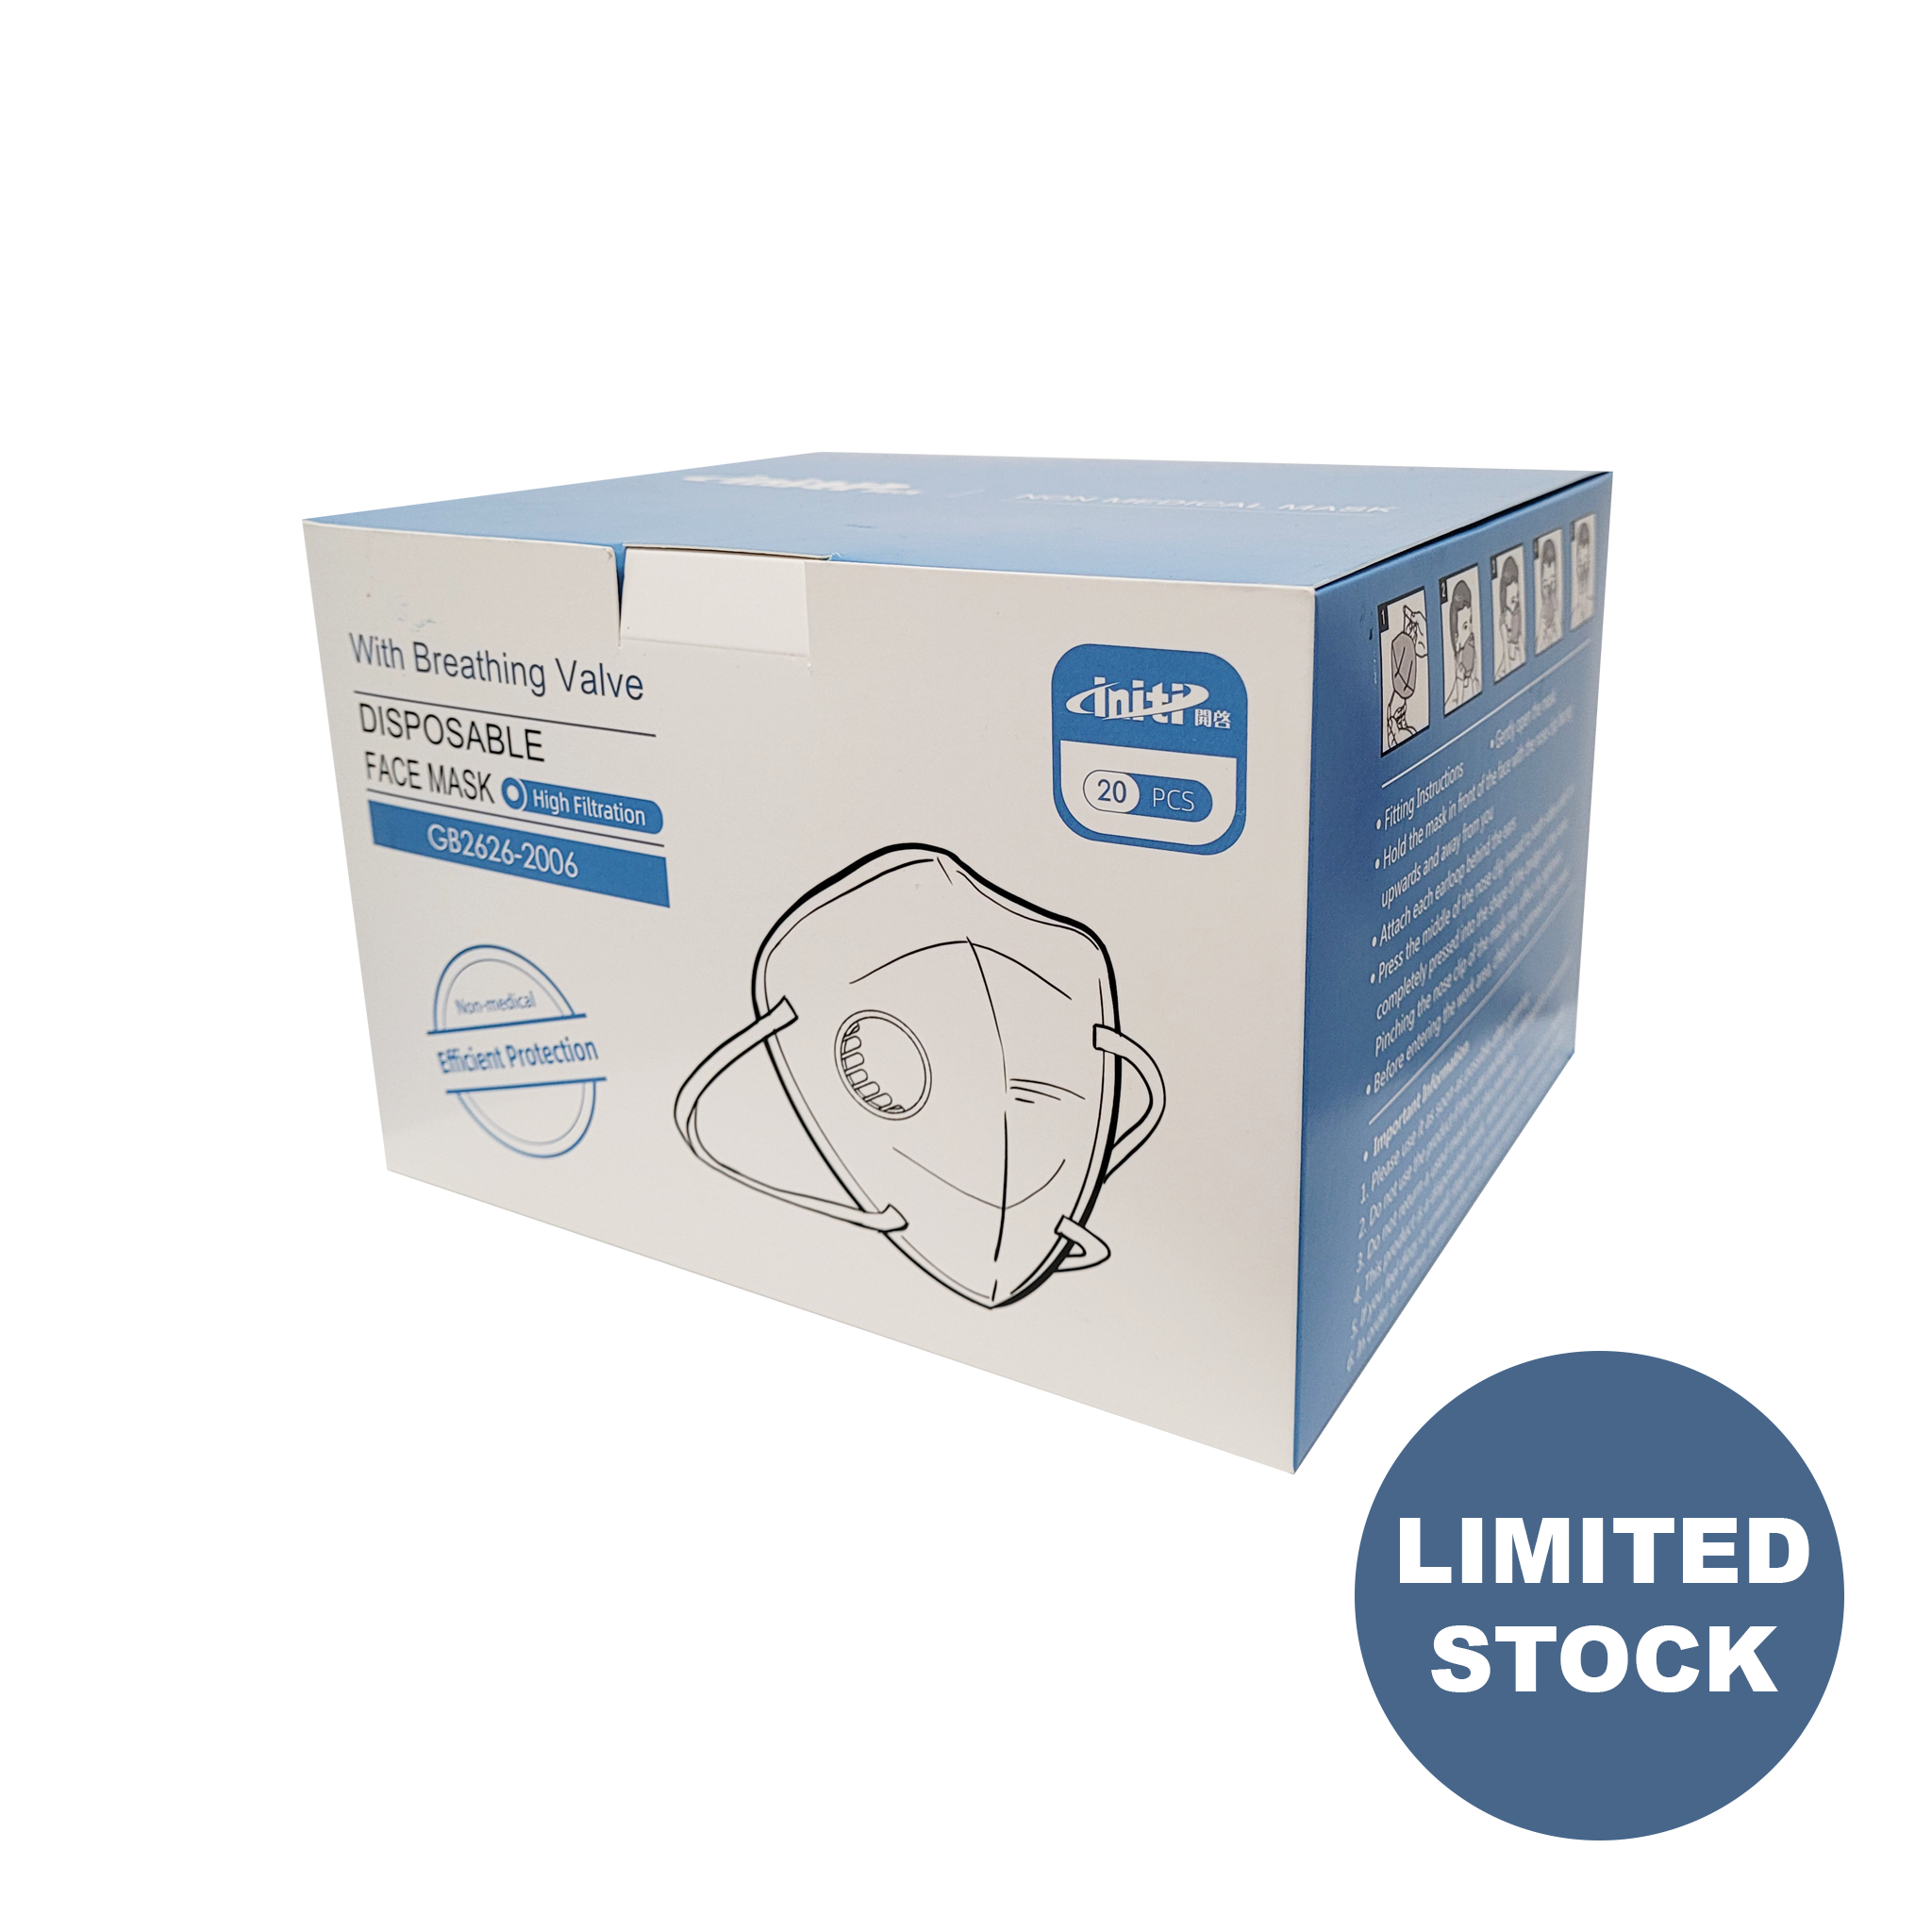 KN95 Respirator | INITI Dustproof with Breathing Valve | Non-Medical Mask | Industrial | (1 Box/20 Masks)